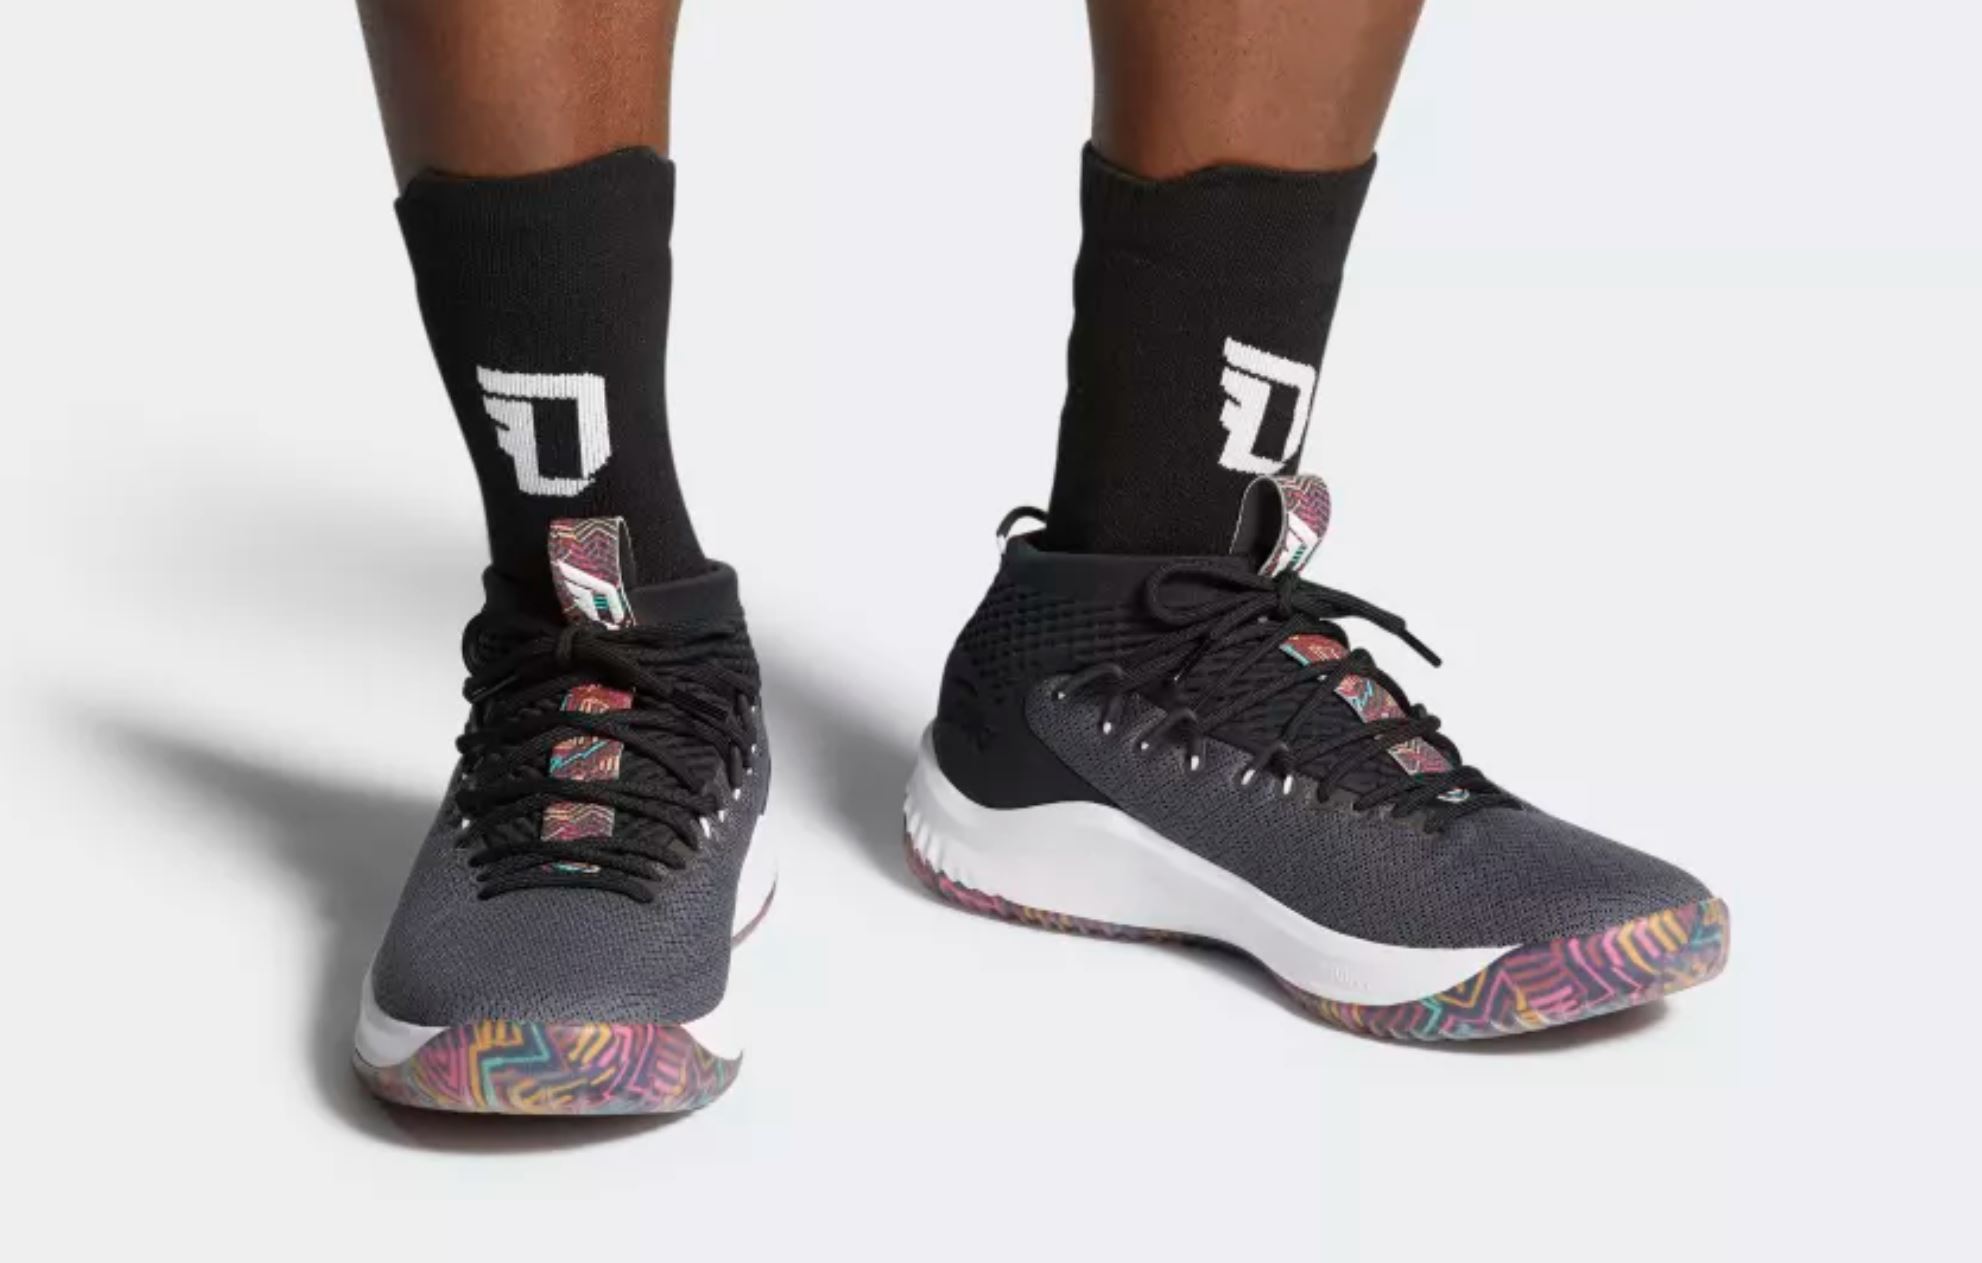 New adidas Dame 4 'Multicolor' Gets 